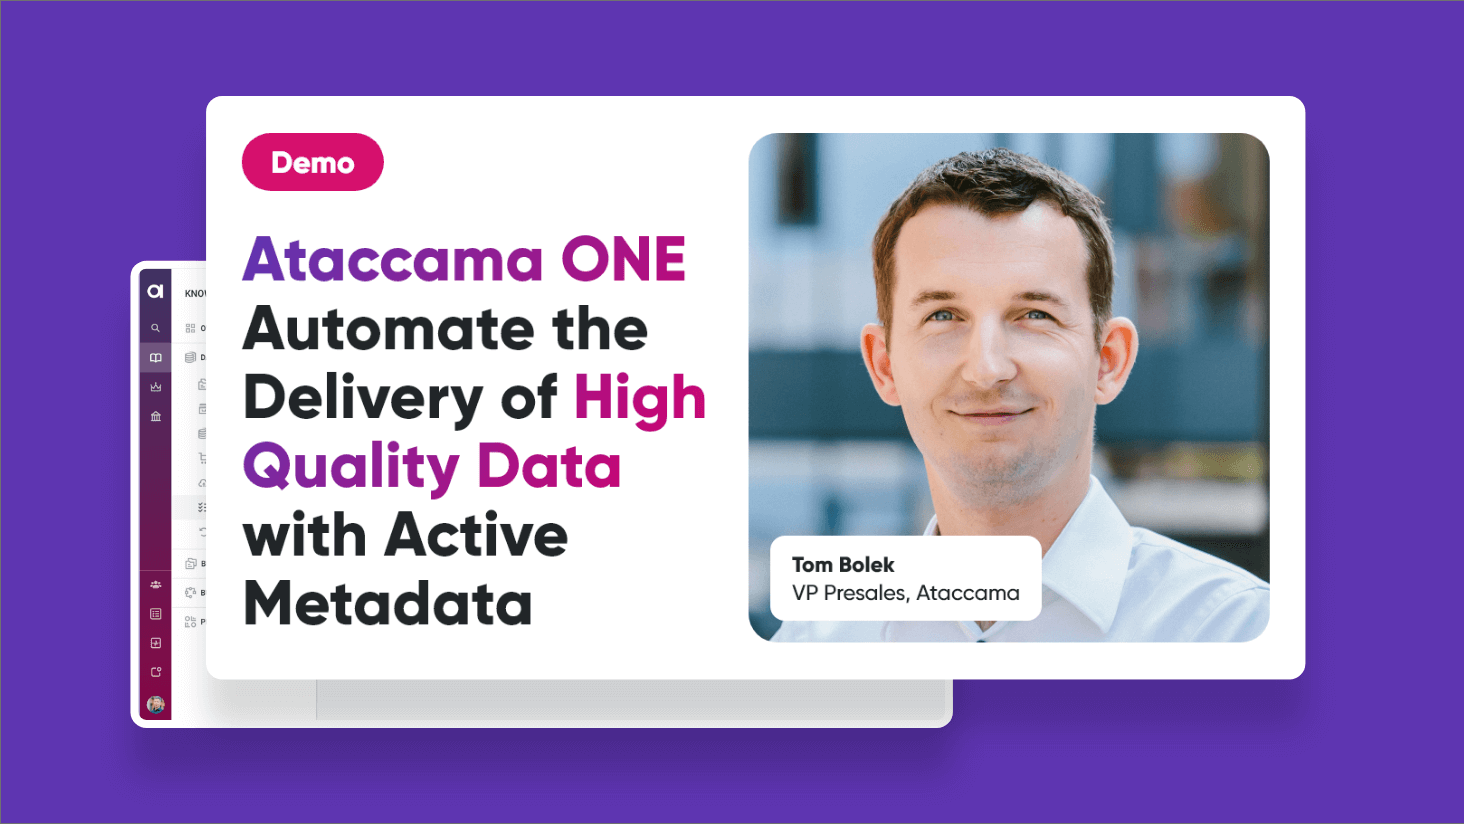 Ataccama ONE: Automate the Delivery of High Quality Data with Active Metadata